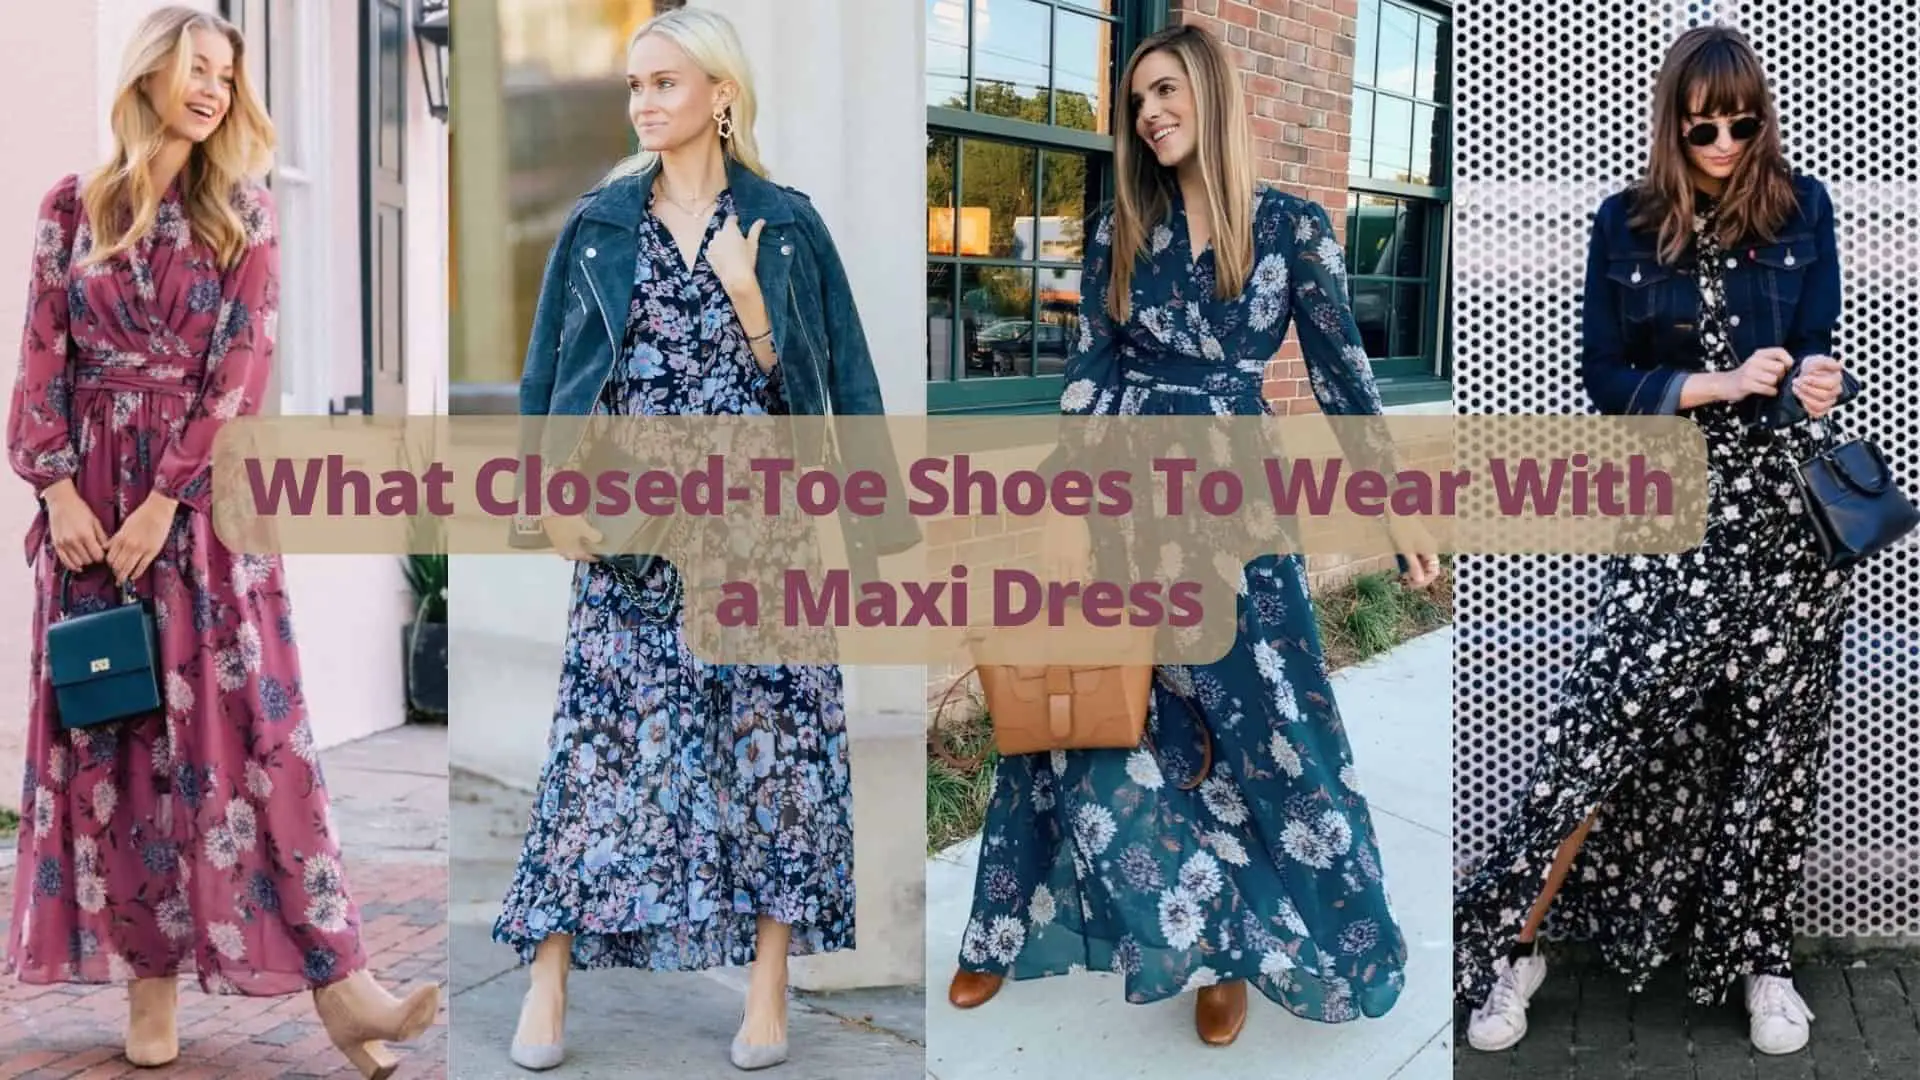 What Closed-Toe Shoes To Wear With a Maxi Dress